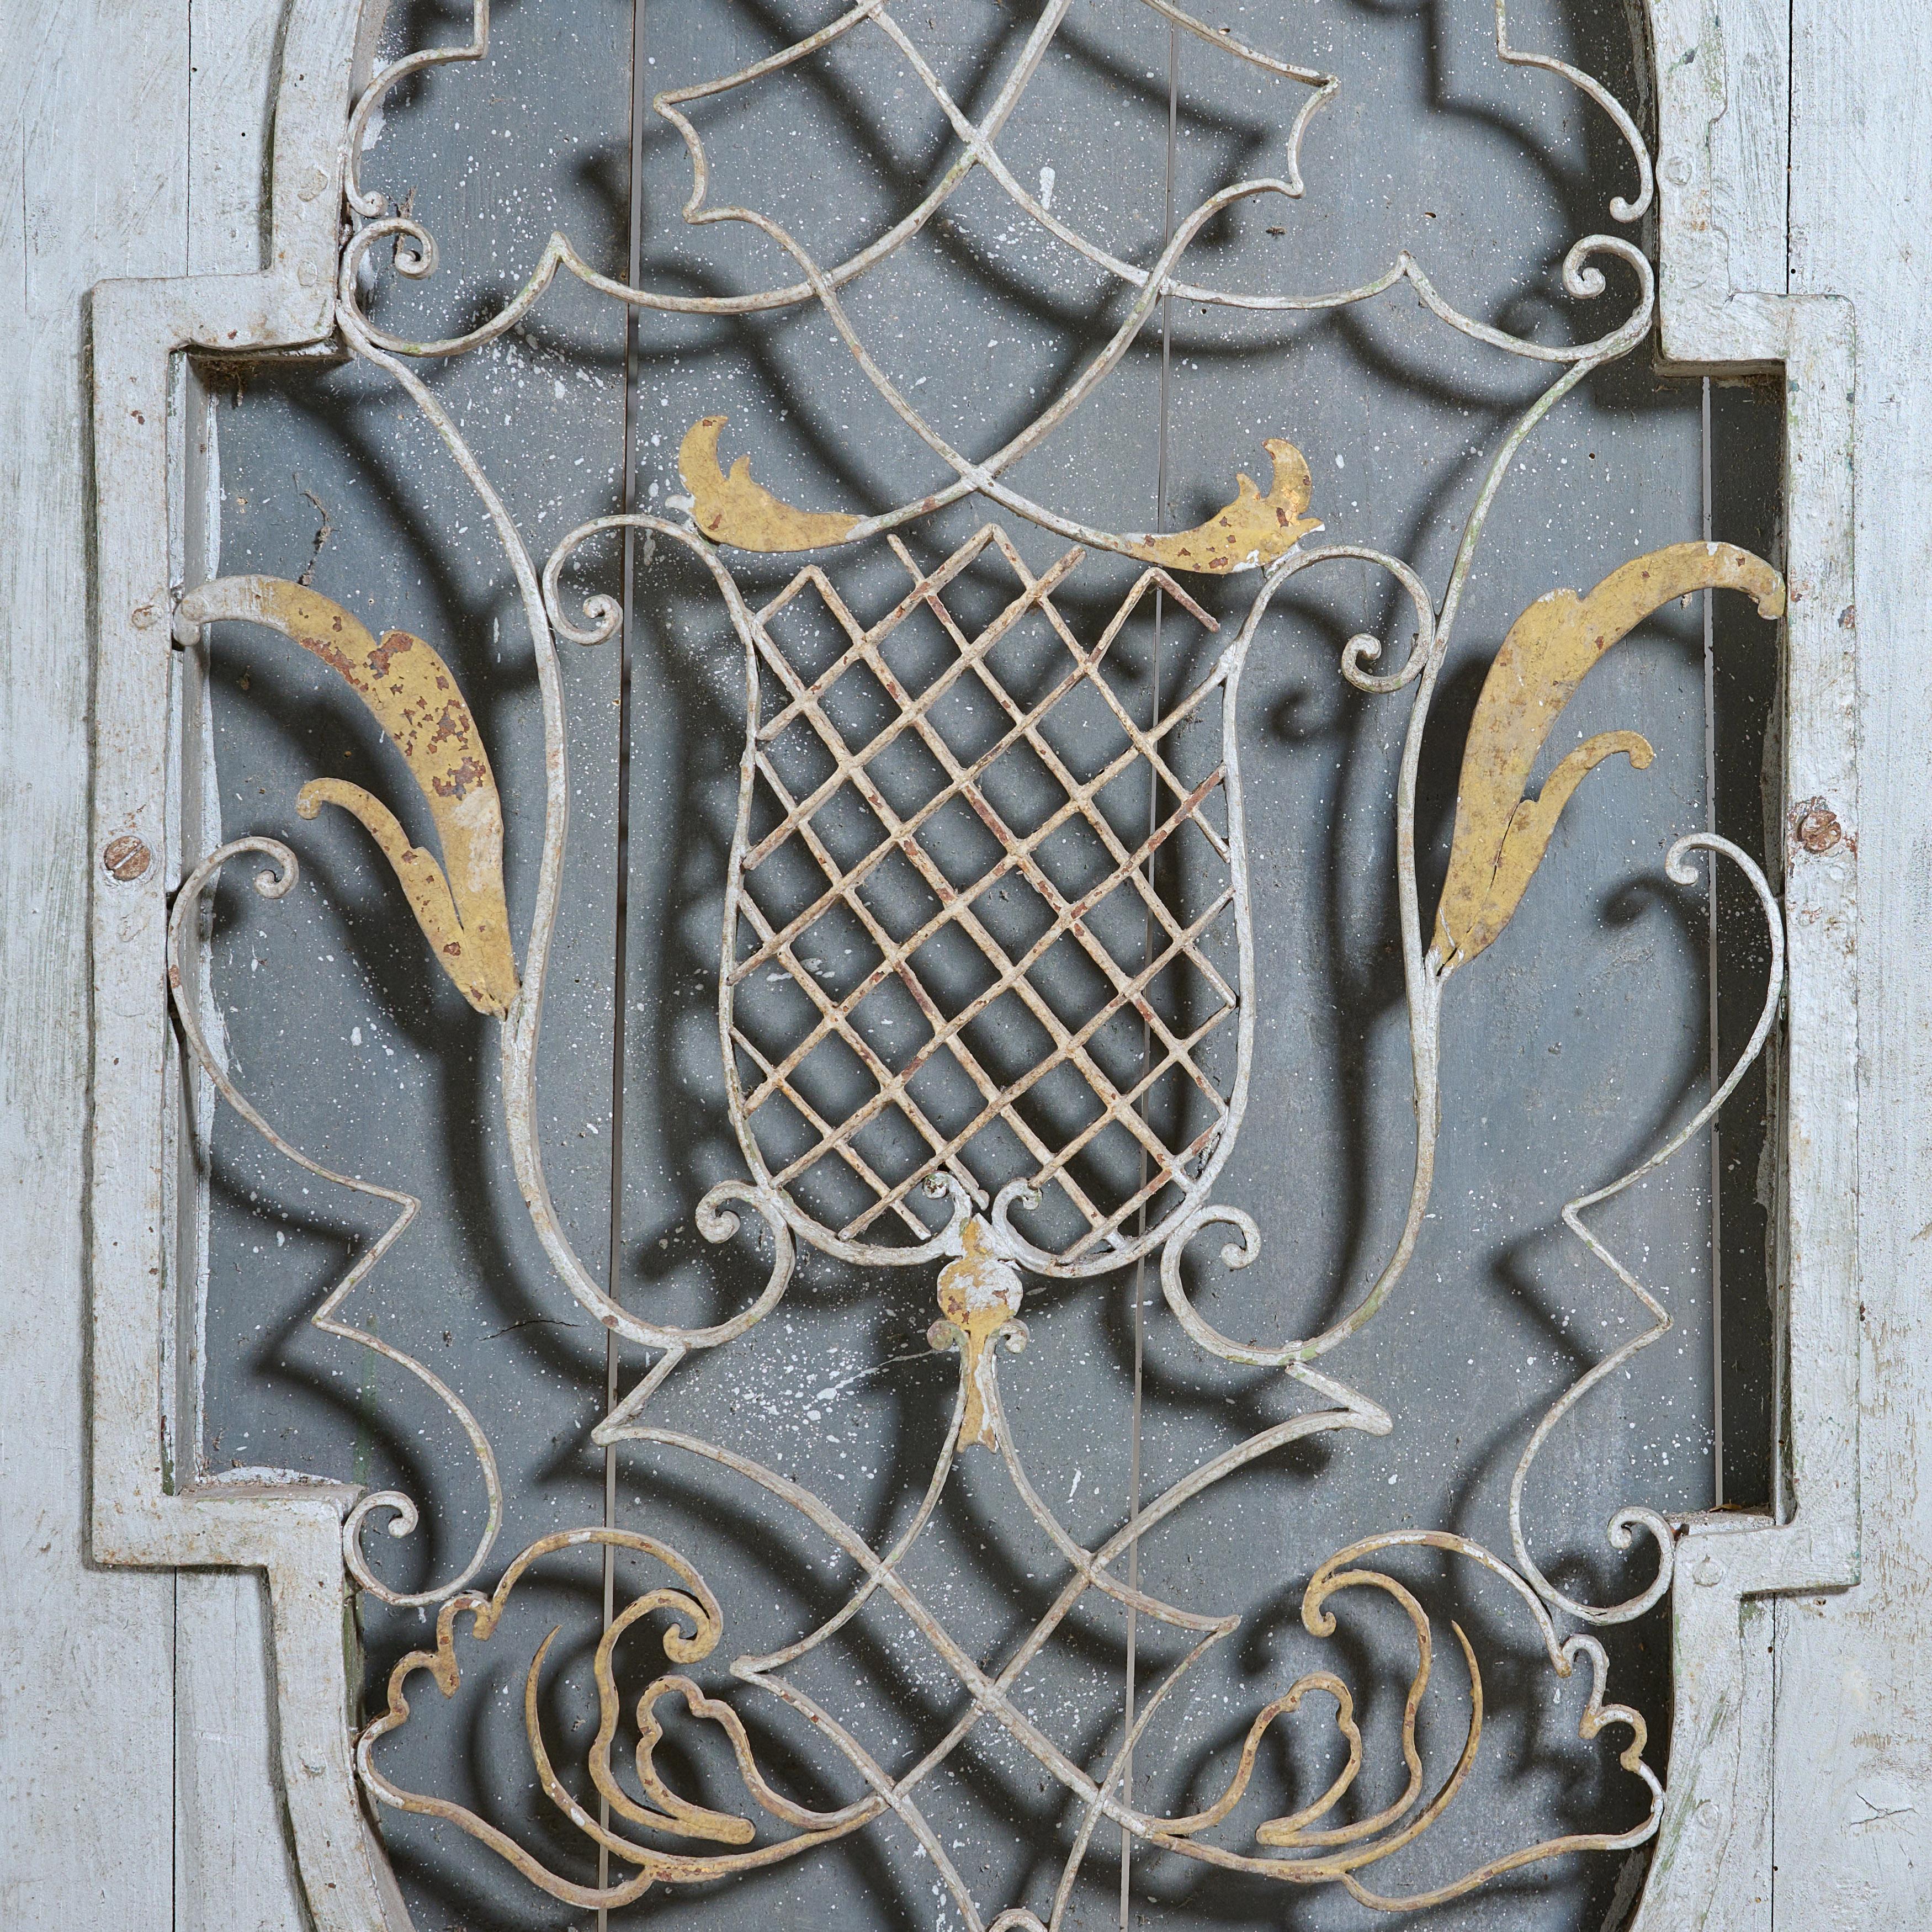 Wrought iron decorative grill with original wood panel and paint.